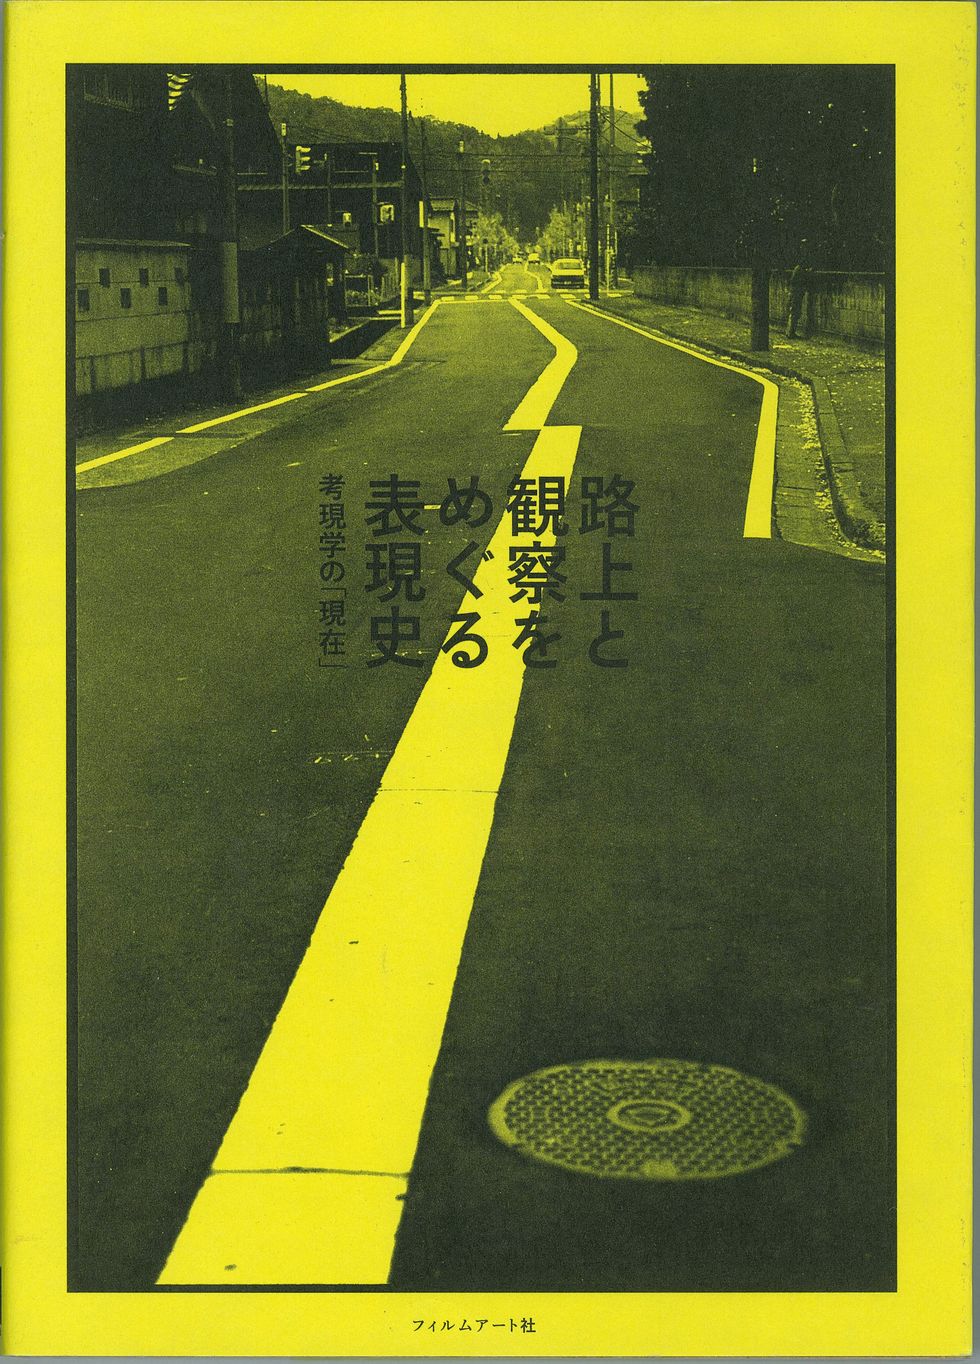 Yellow, Text, Road, Line, Lane, Infrastructure, Poster, Parallel, Asphalt, Thoroughfare, 